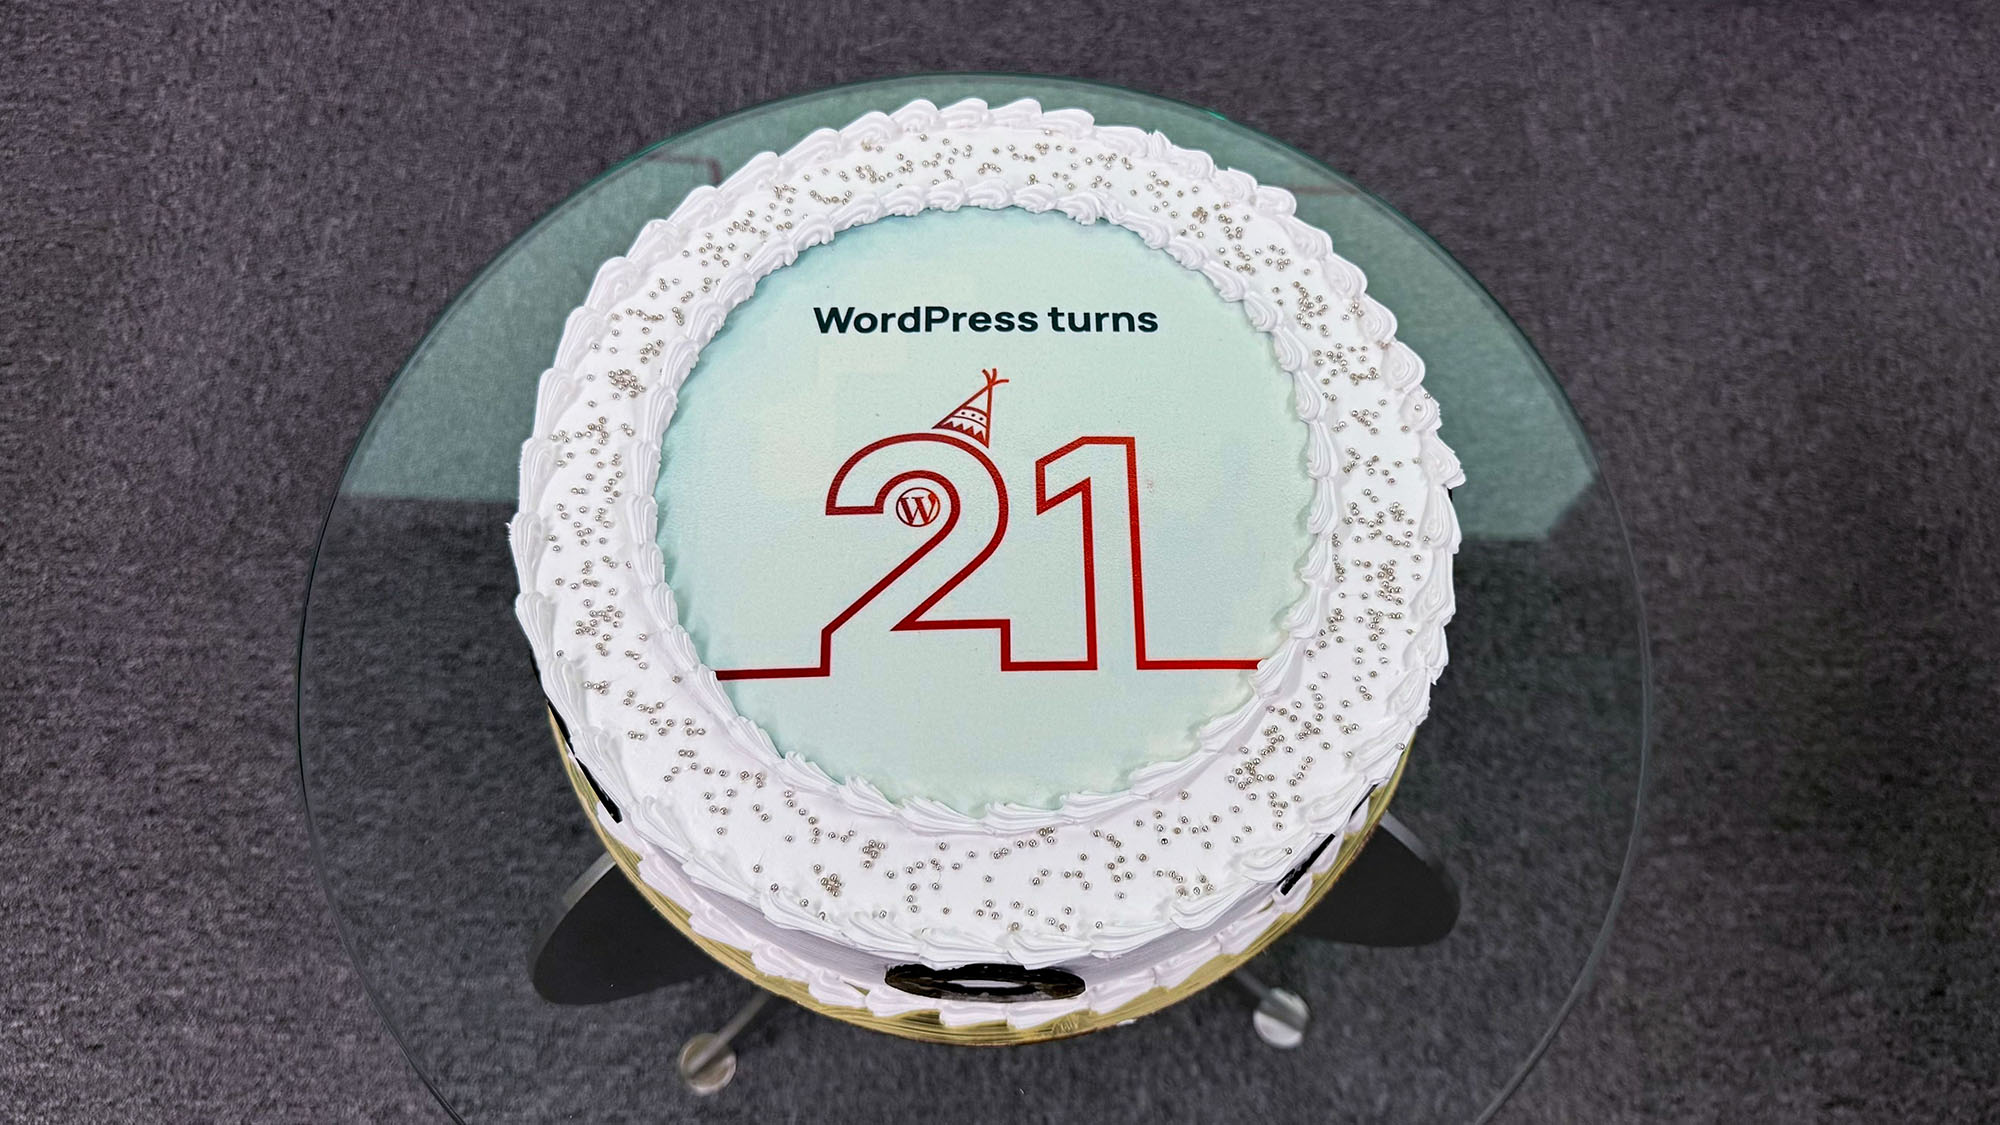 Cake for celebrating 21 years of WordPress with Contributors Week at rtCamp.